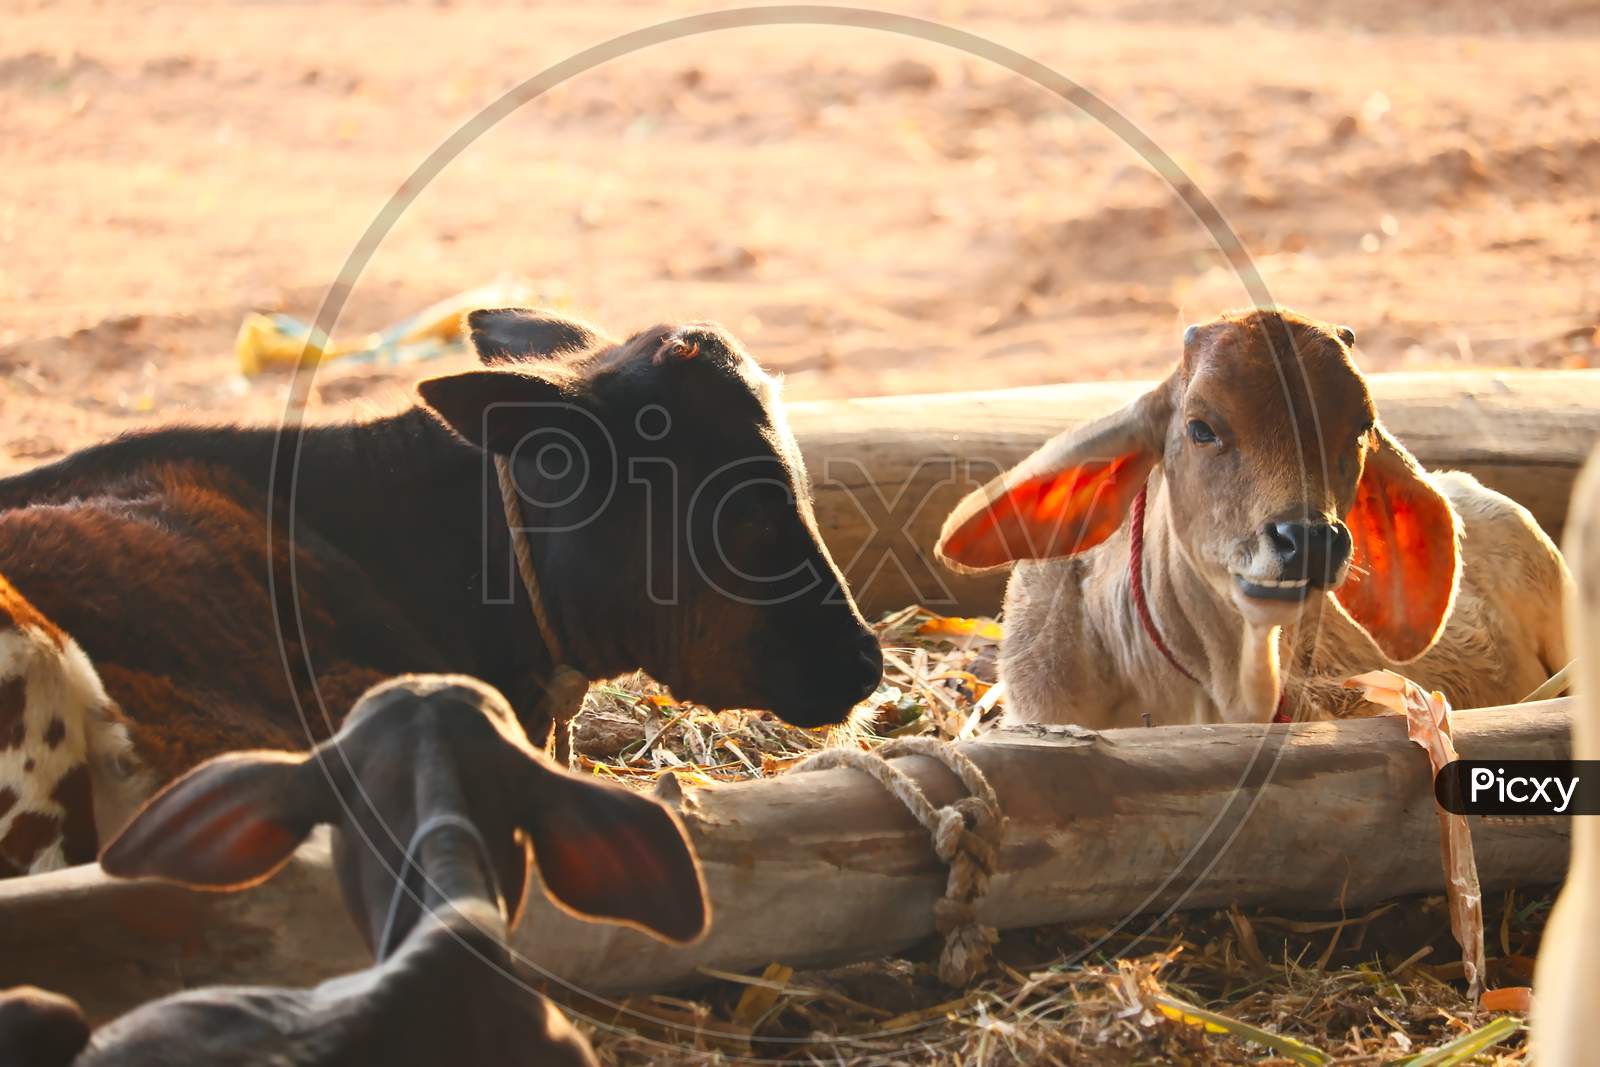 Buffalo And Cows On A Farm In India,Indian Cow Tabela In Gujarat,Dairy Cows In A Farm,Indian Buffalo